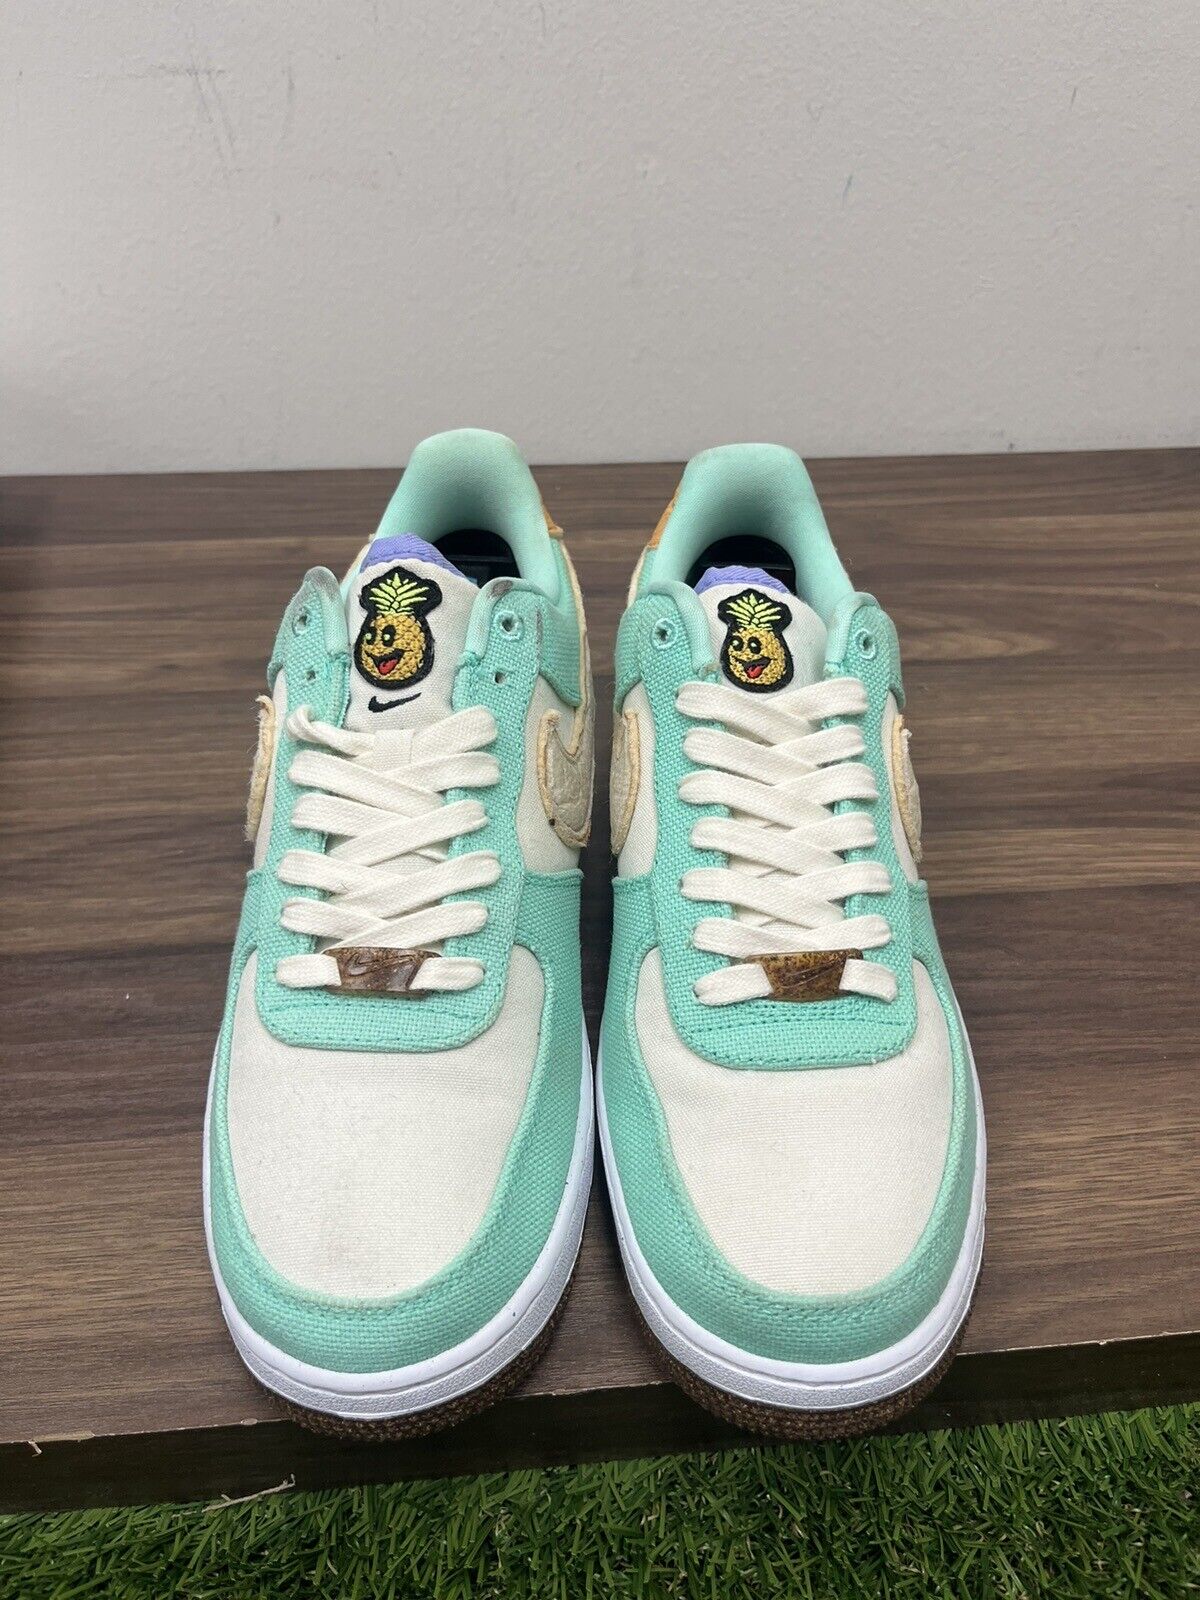 NIKE AIR FORCE 1 ‘07 LX HAPPY PINEAPPLE SHOES CZ0268 WOMENS CZ0268-300 SIZE 10.5